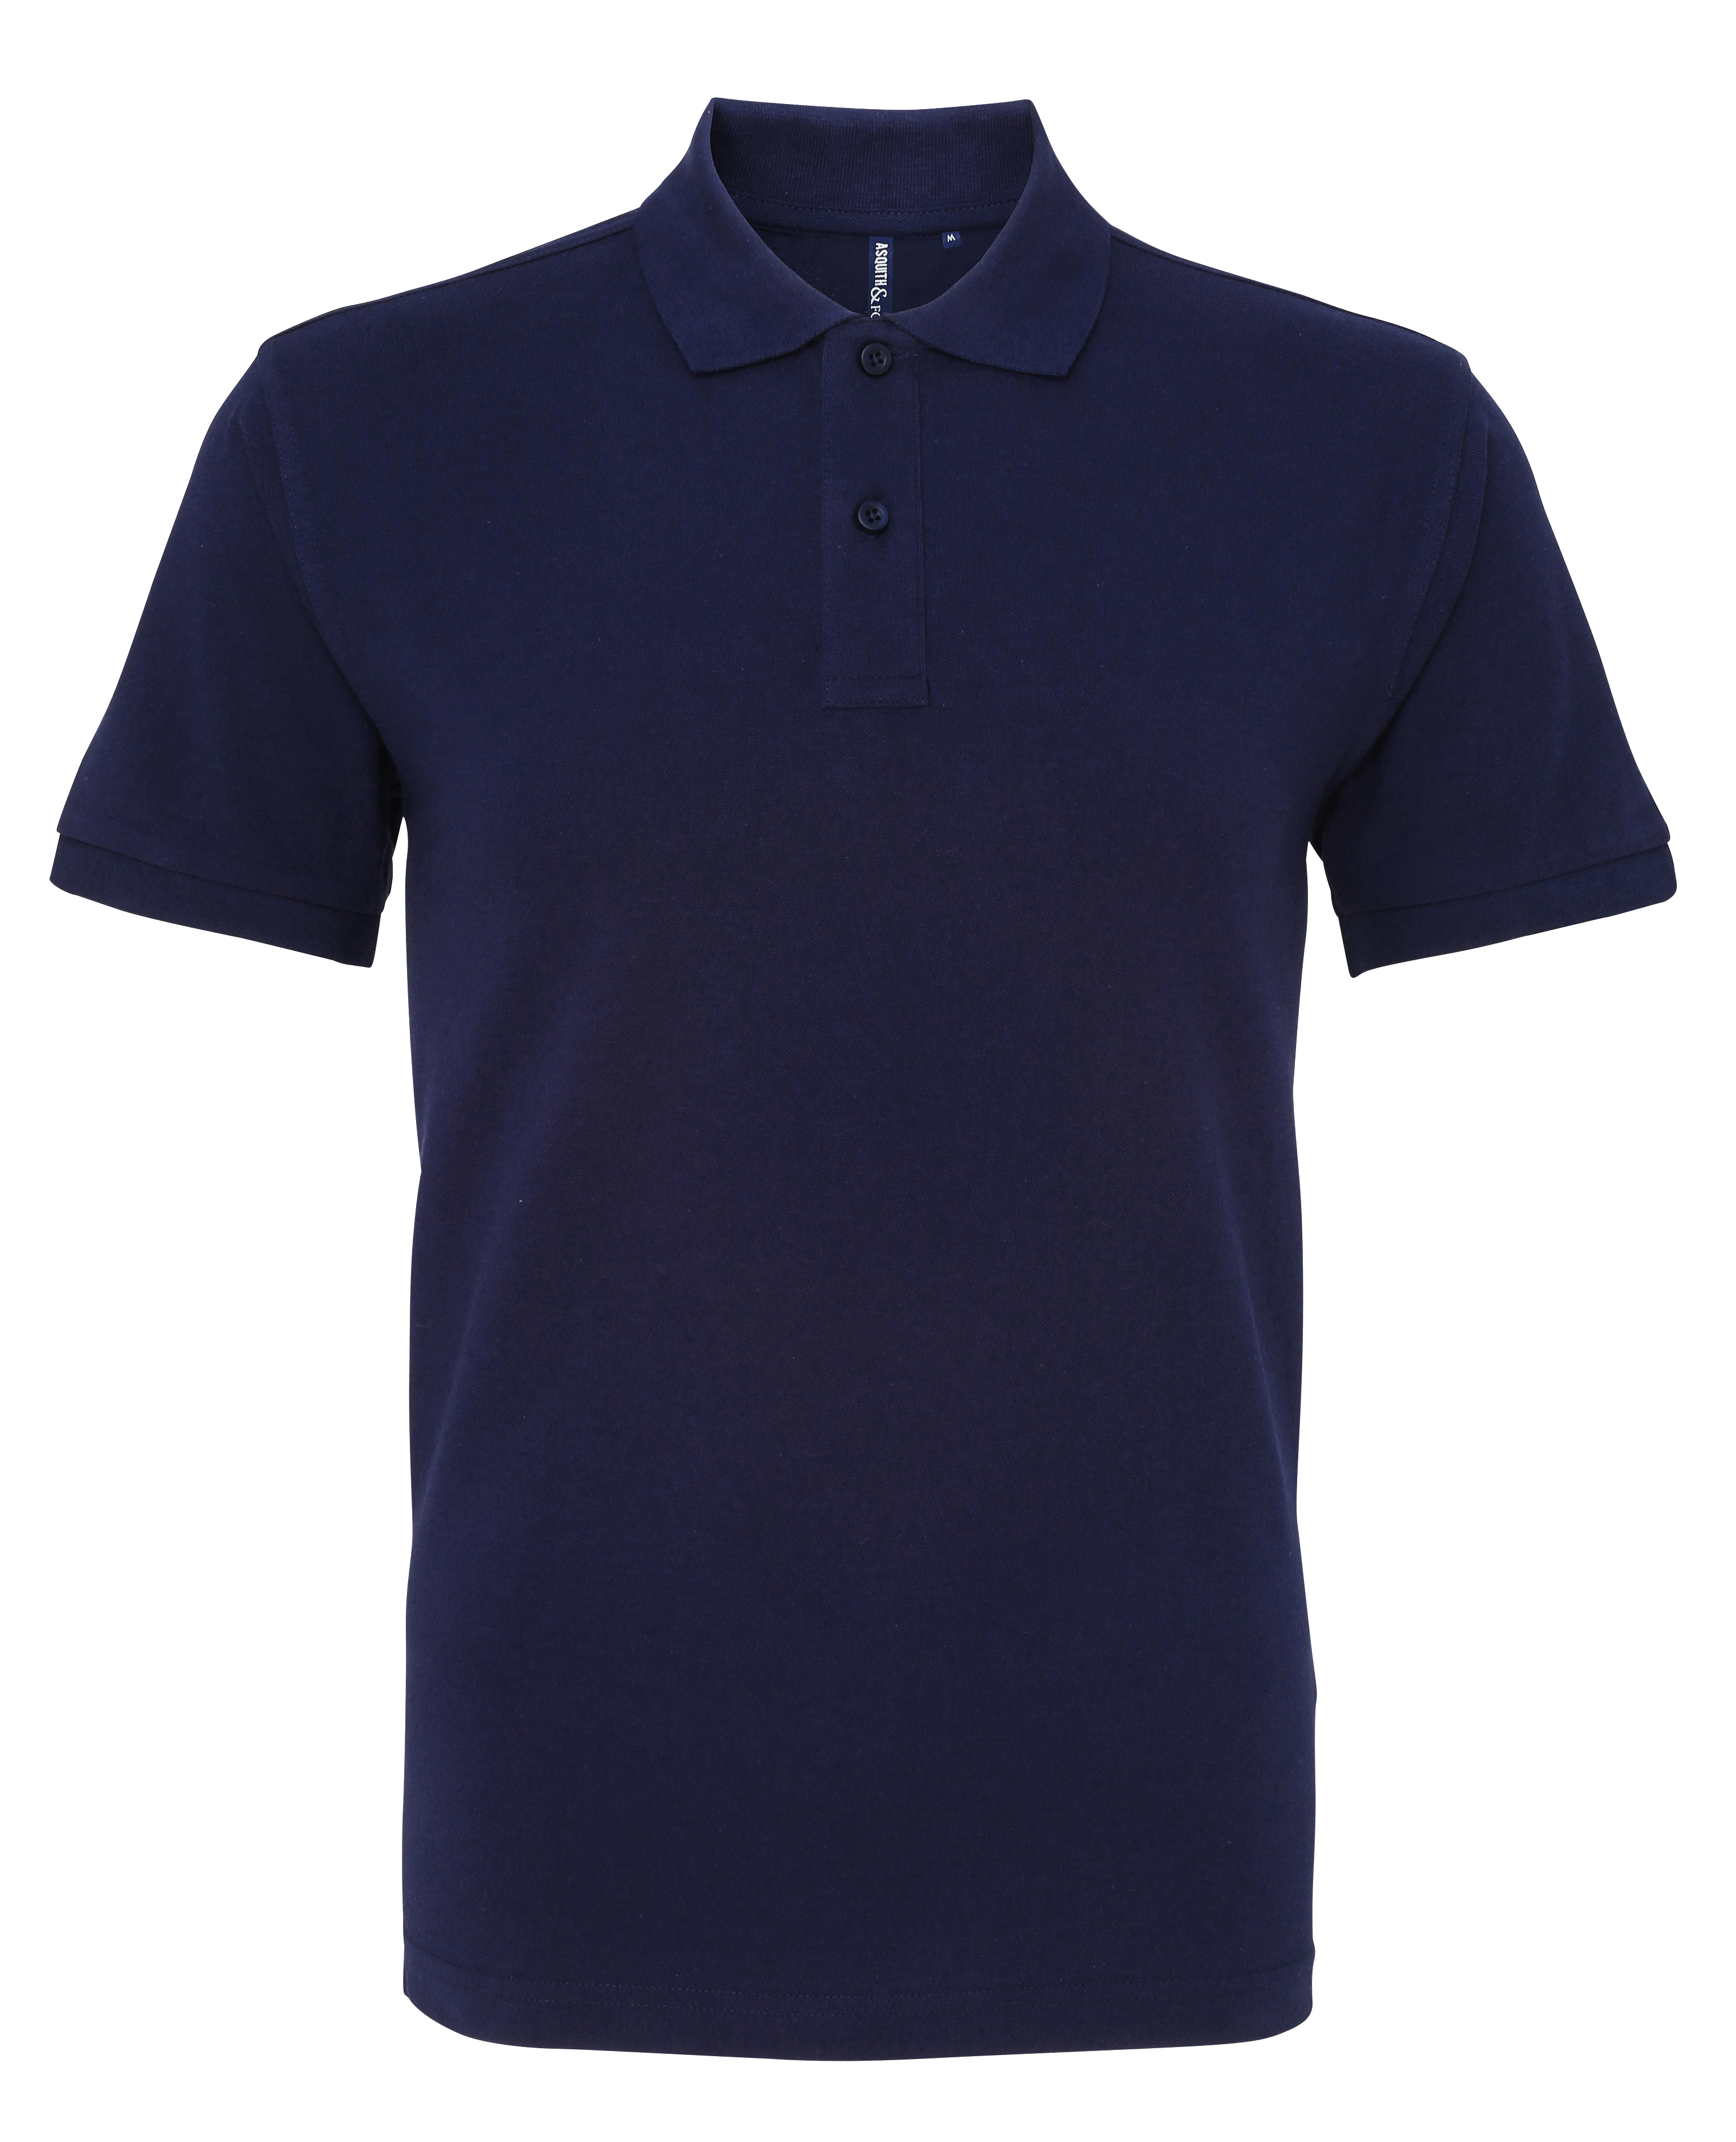 ax-httpswebsystems.s3.amazonaws.comtmp_for_downloadasquith-and-fox-men27s-polo-navy.jpg